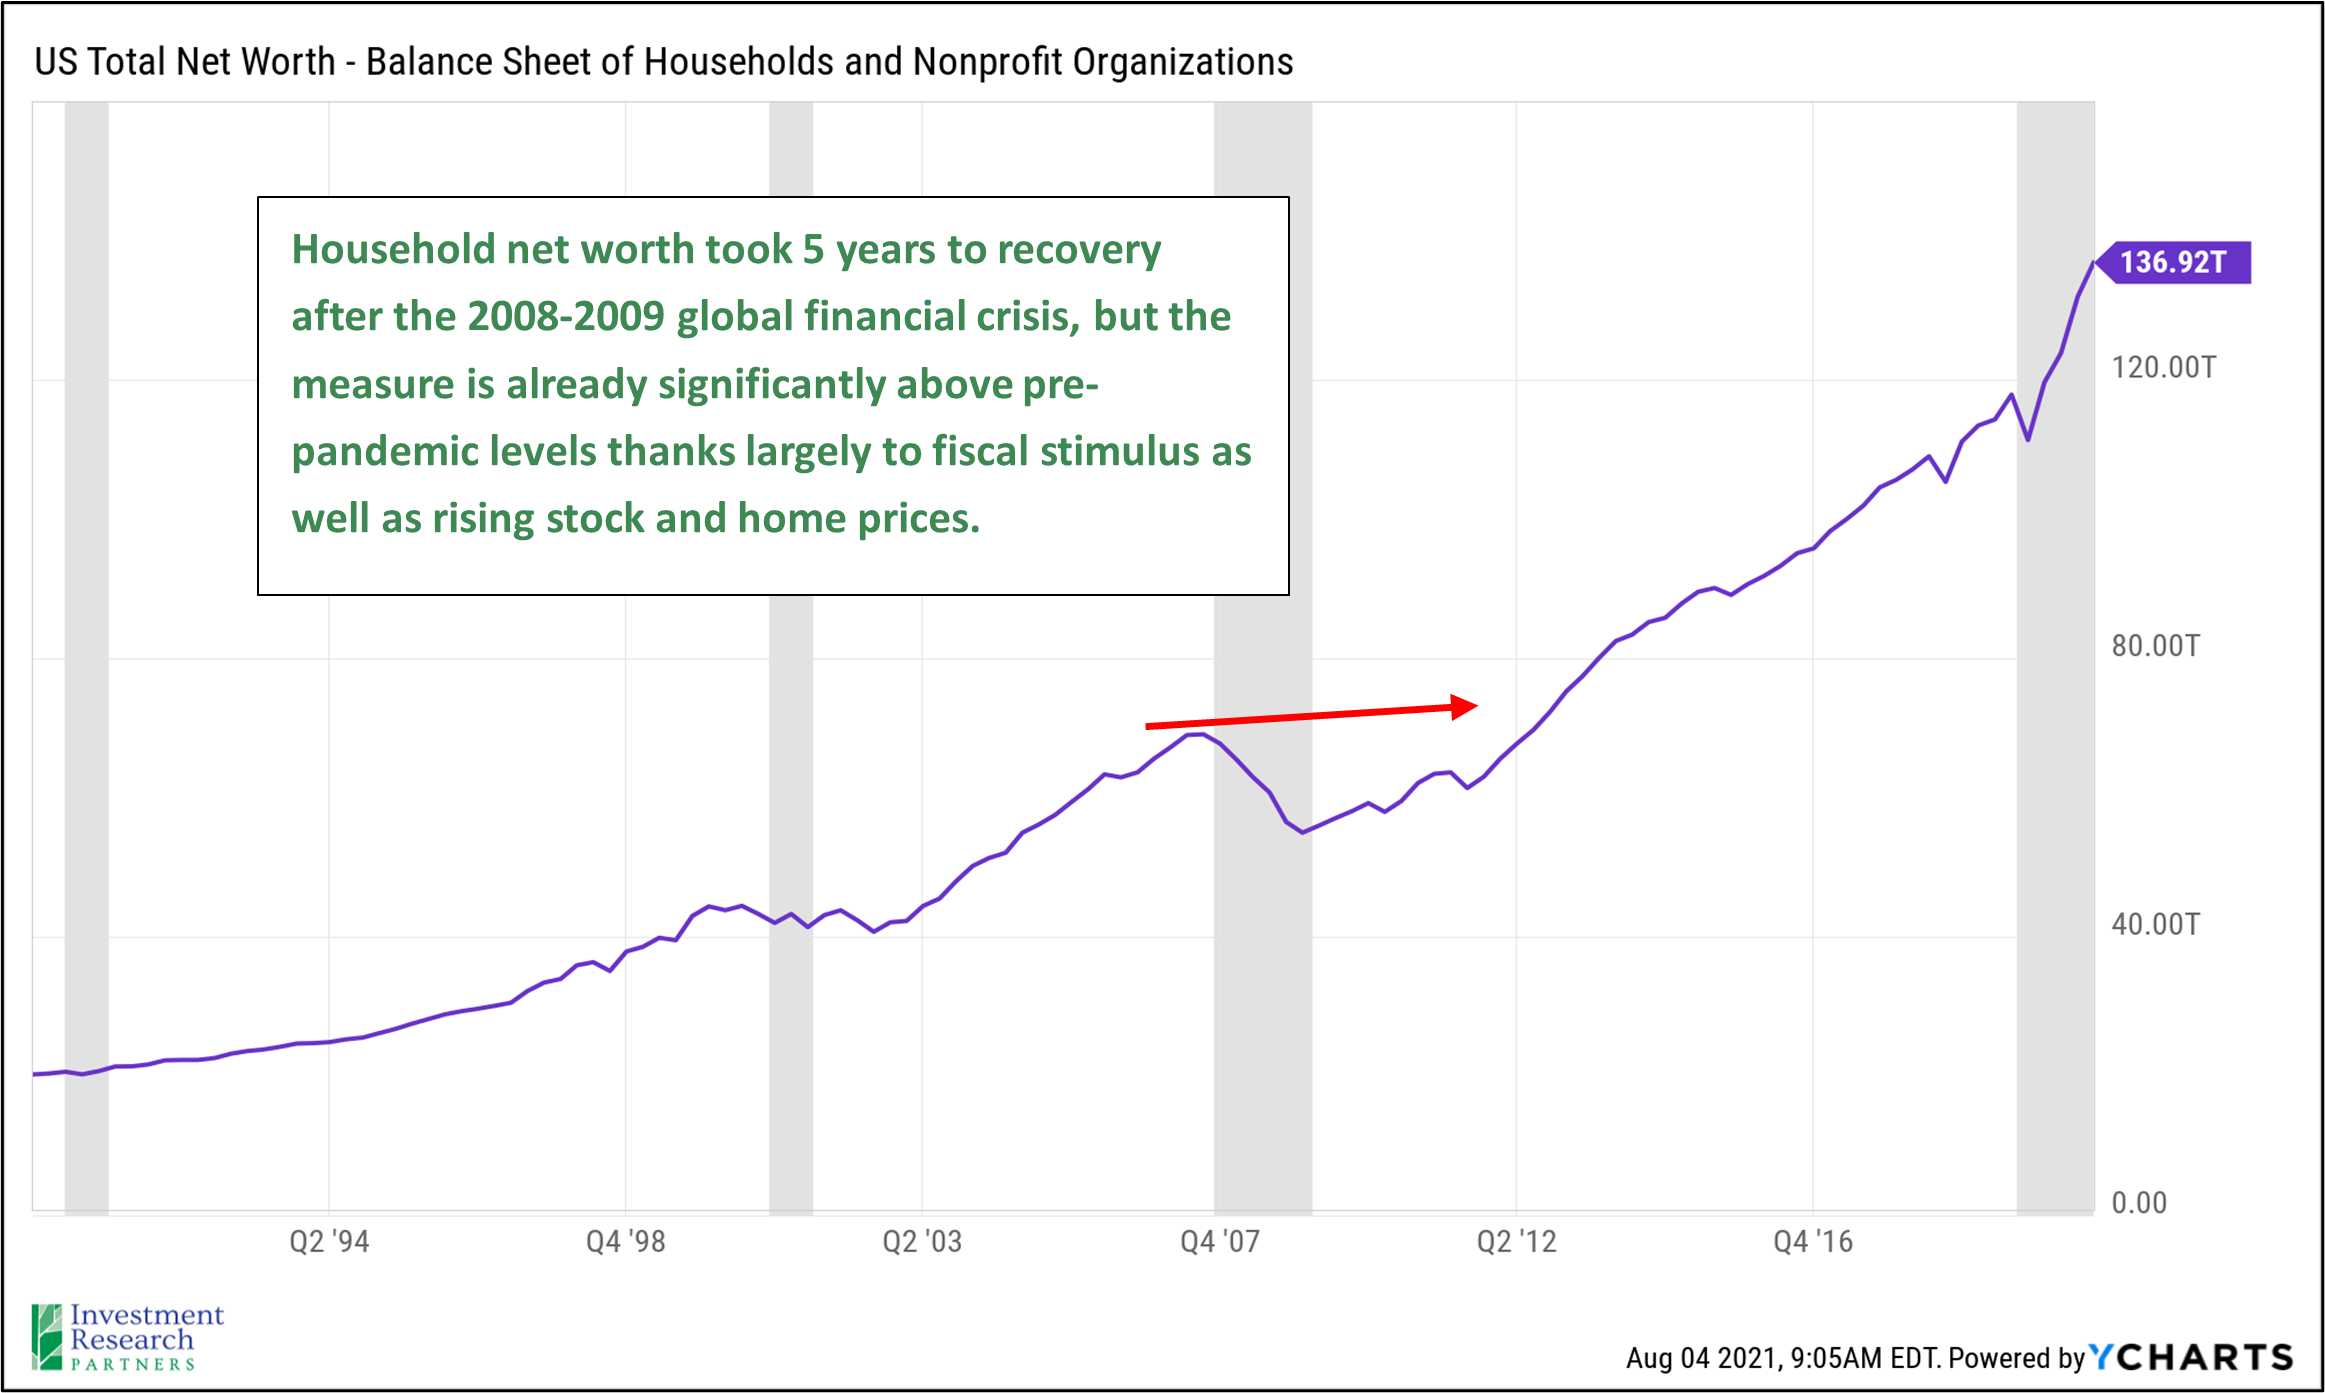 Line graph depicting US Total Net Worth - Balance Sheet of Households and Nonprofit Organizations from Q2 '94 to Q4 '16 with note: Household net worth took 5 years to recovery after the 2008-2009 global financial crisis, but the measure is already significantly above pre-pandemic levels thanks largely to fiscal stimulus as well as rising stock and home prices.